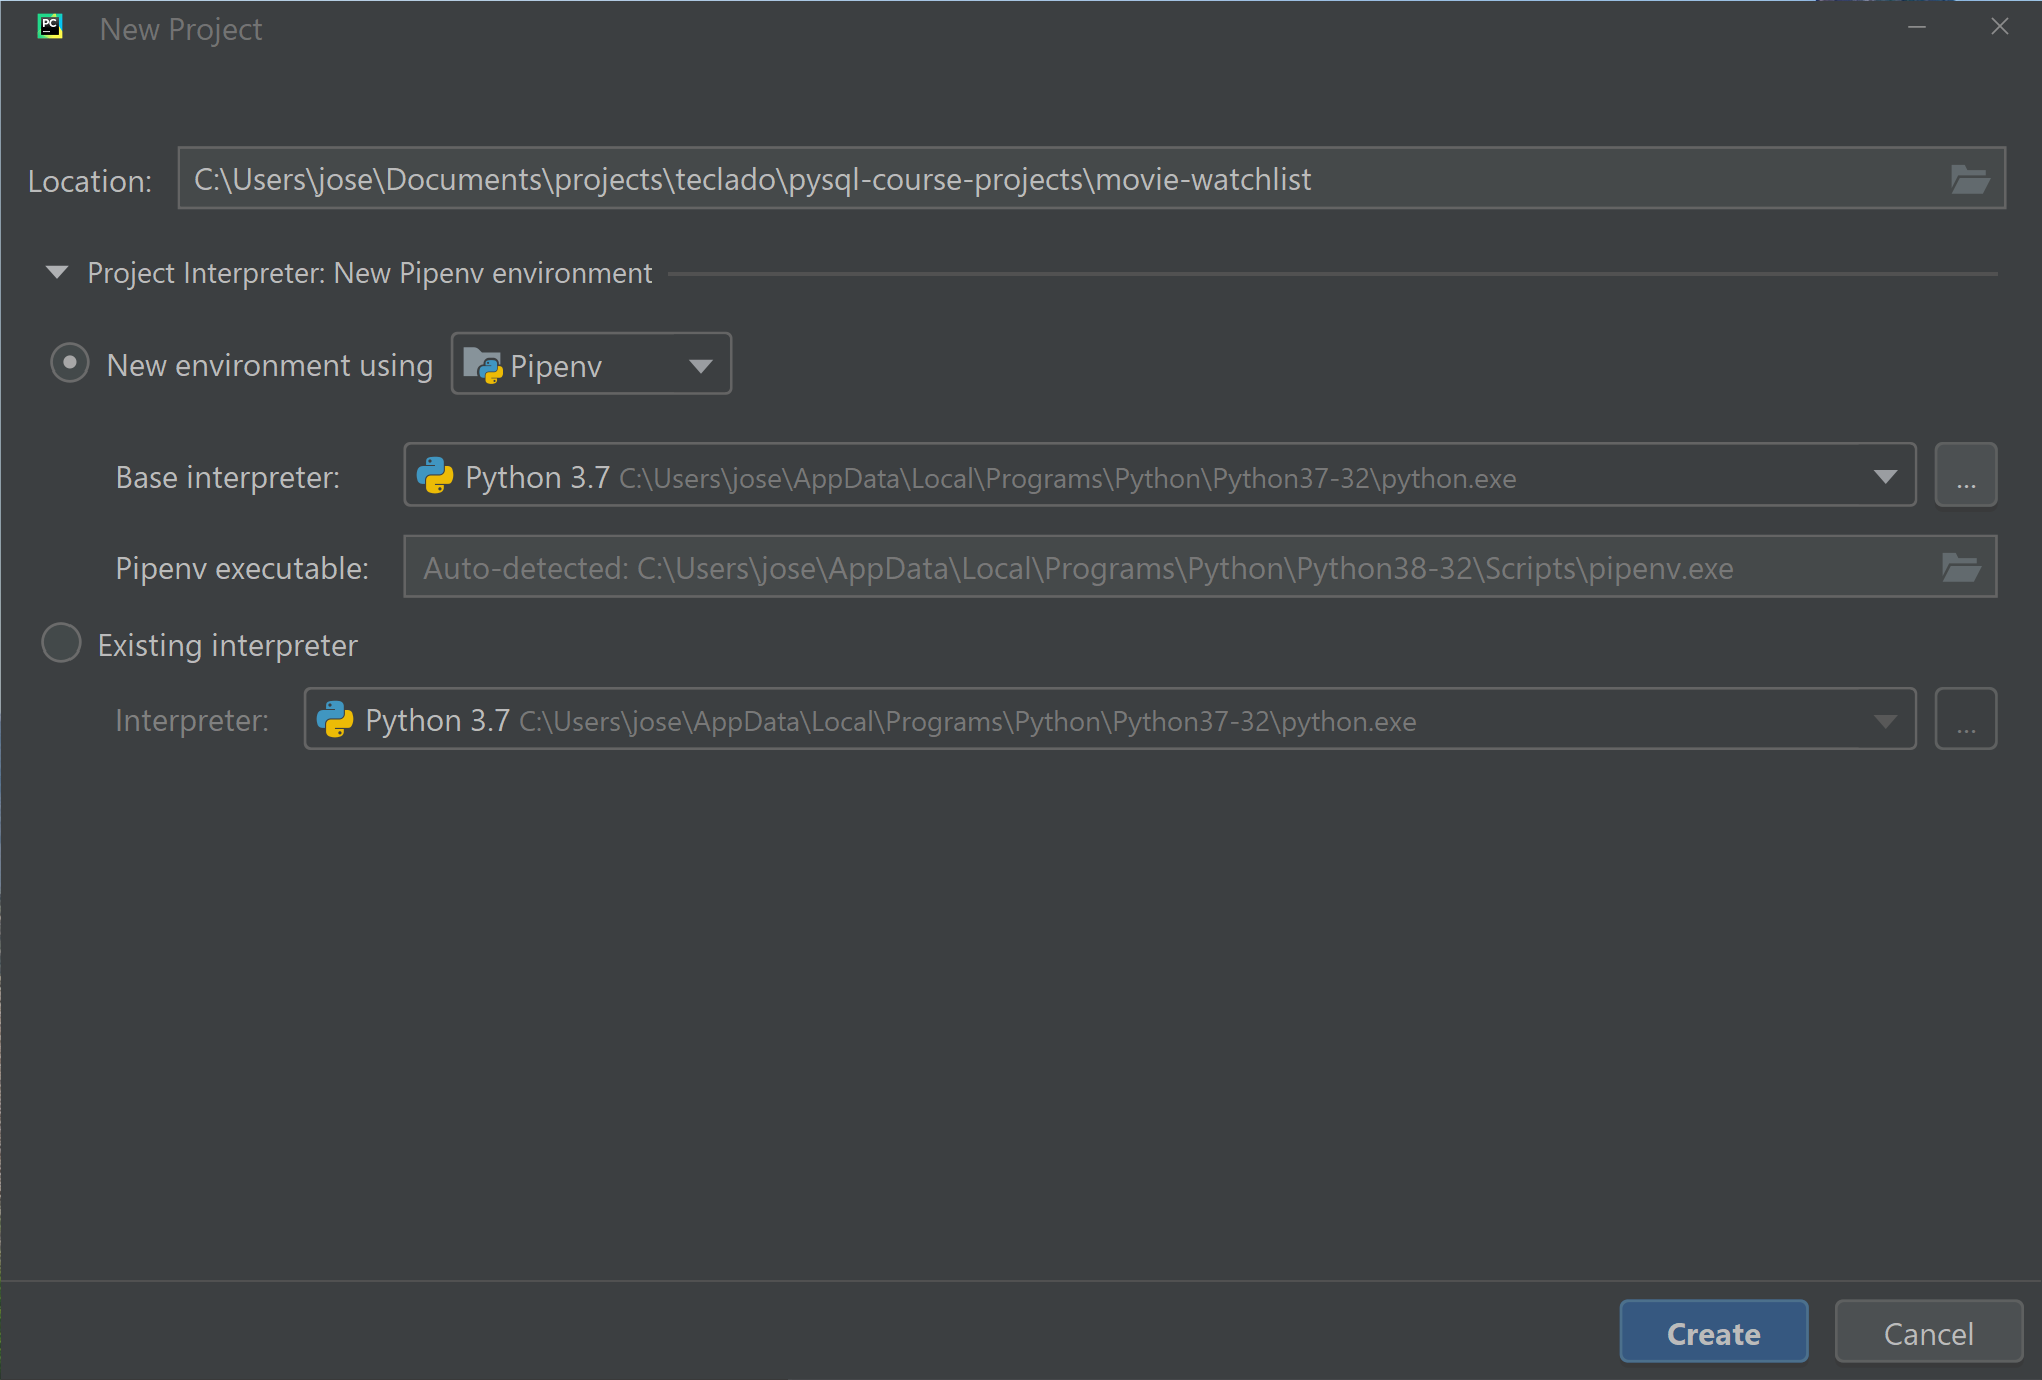 Creating a new PyCharm Project with Pipenv